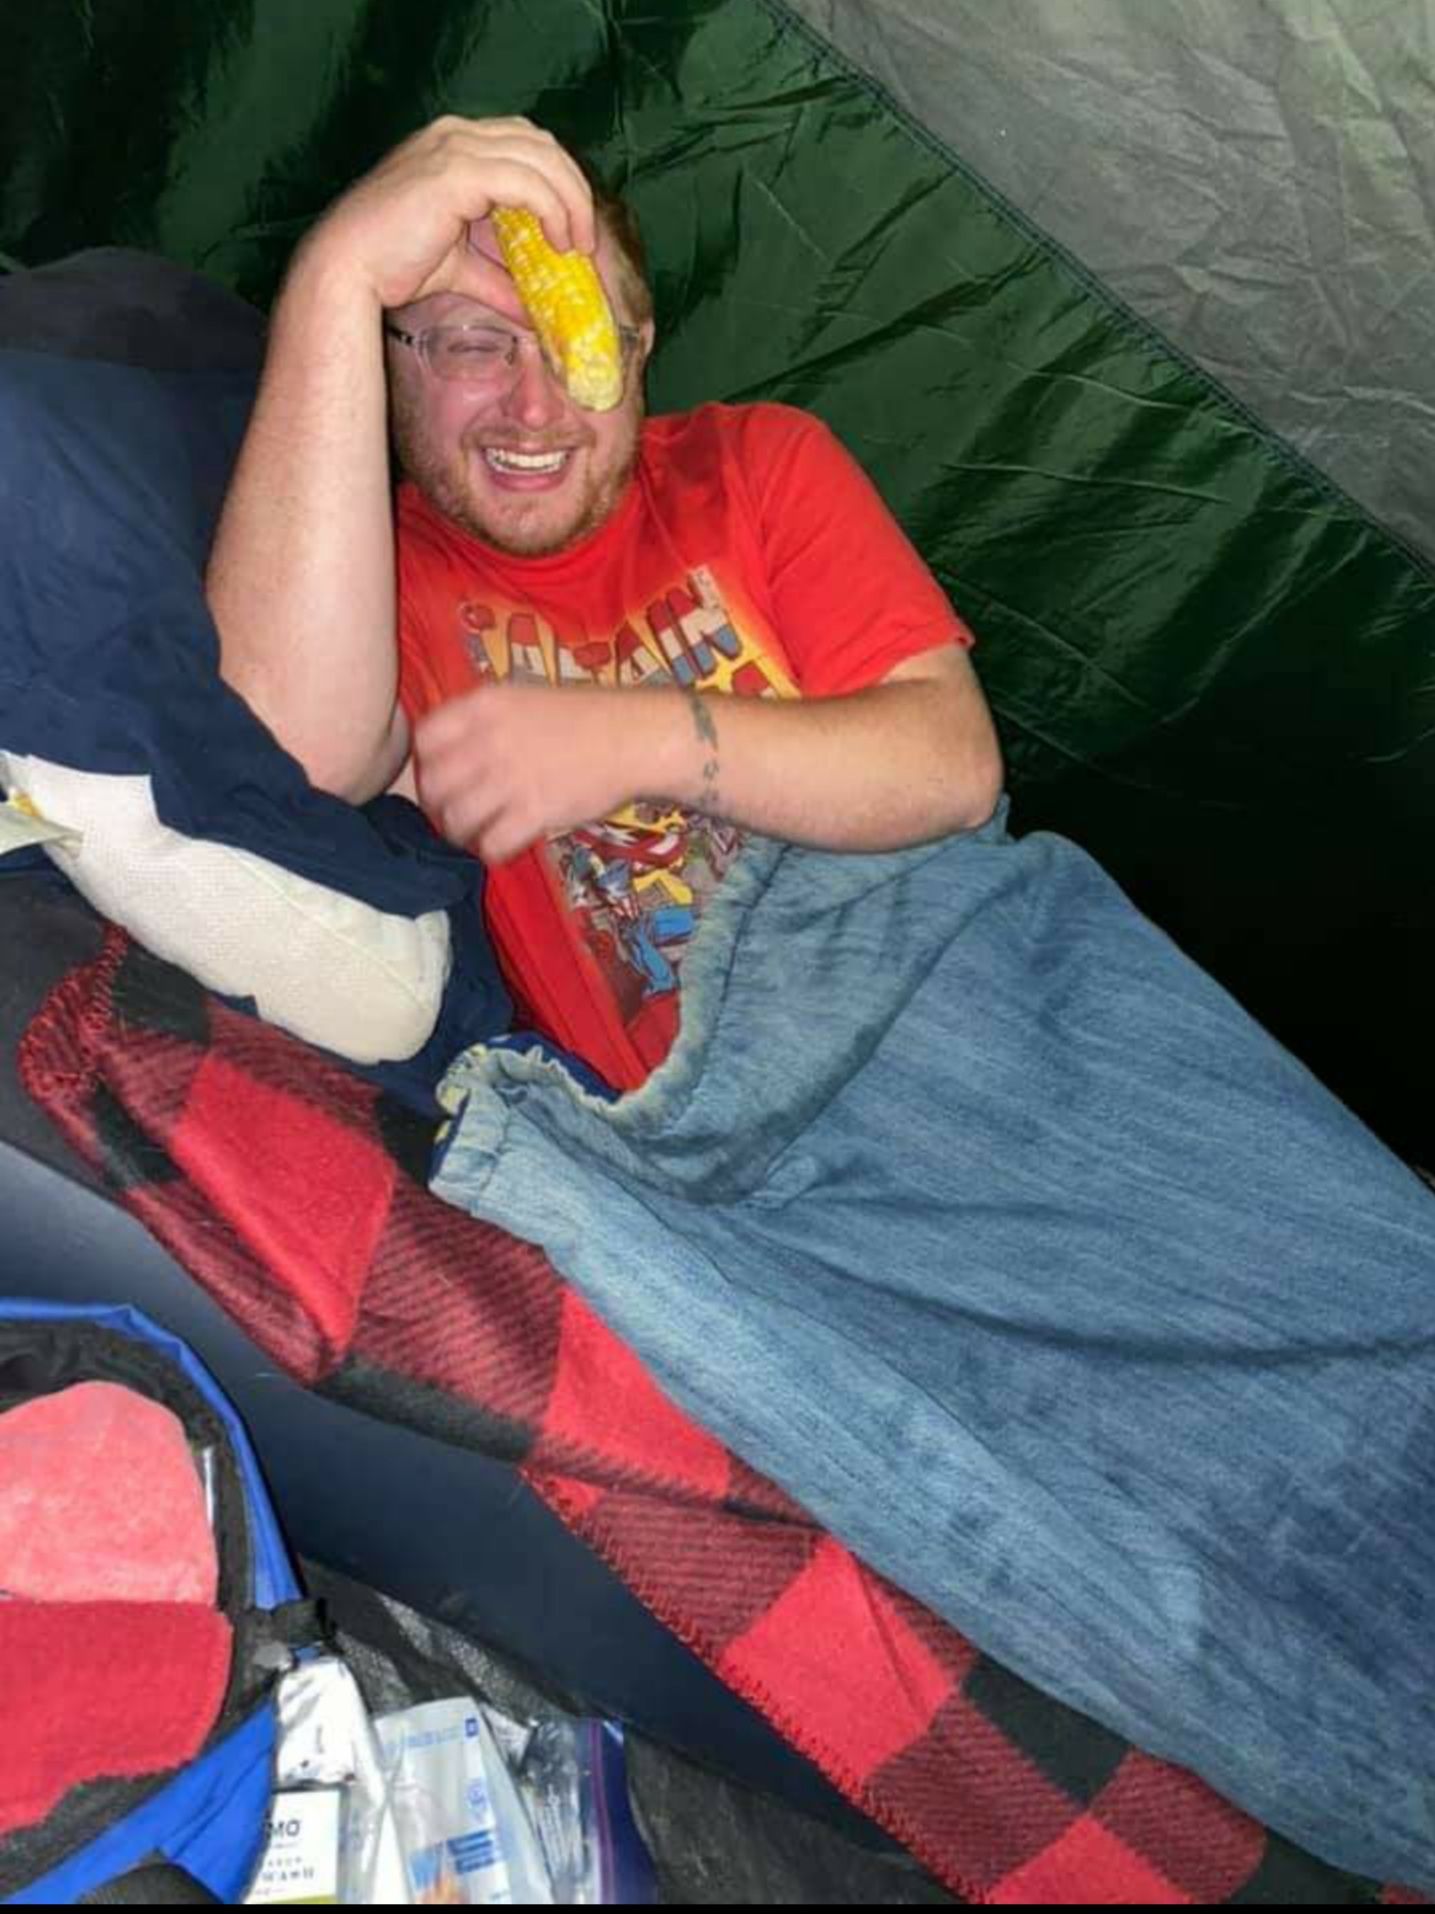 Heard a weird crunching in our tent while camping, look over to find my cousin enjoying an ear of corn very intoxicated